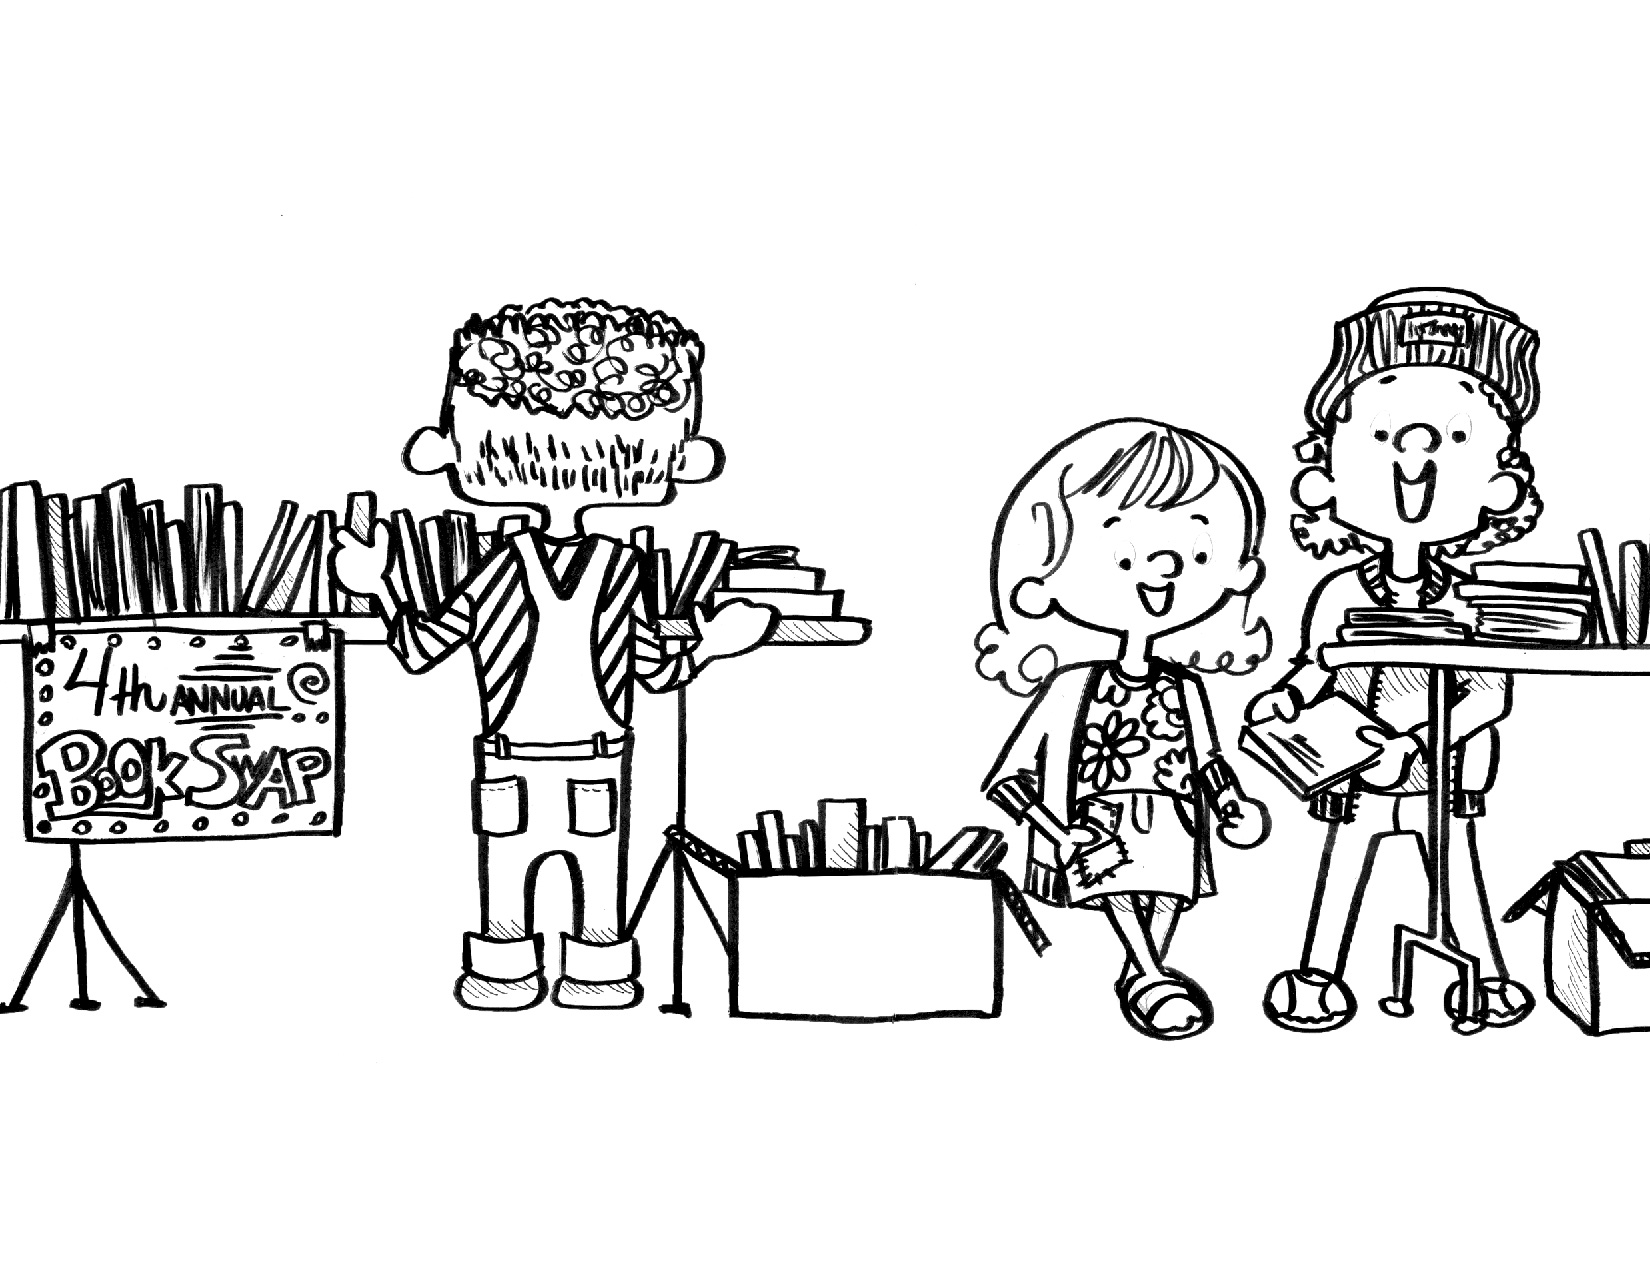 Coloring Sheet of children at a yard sale